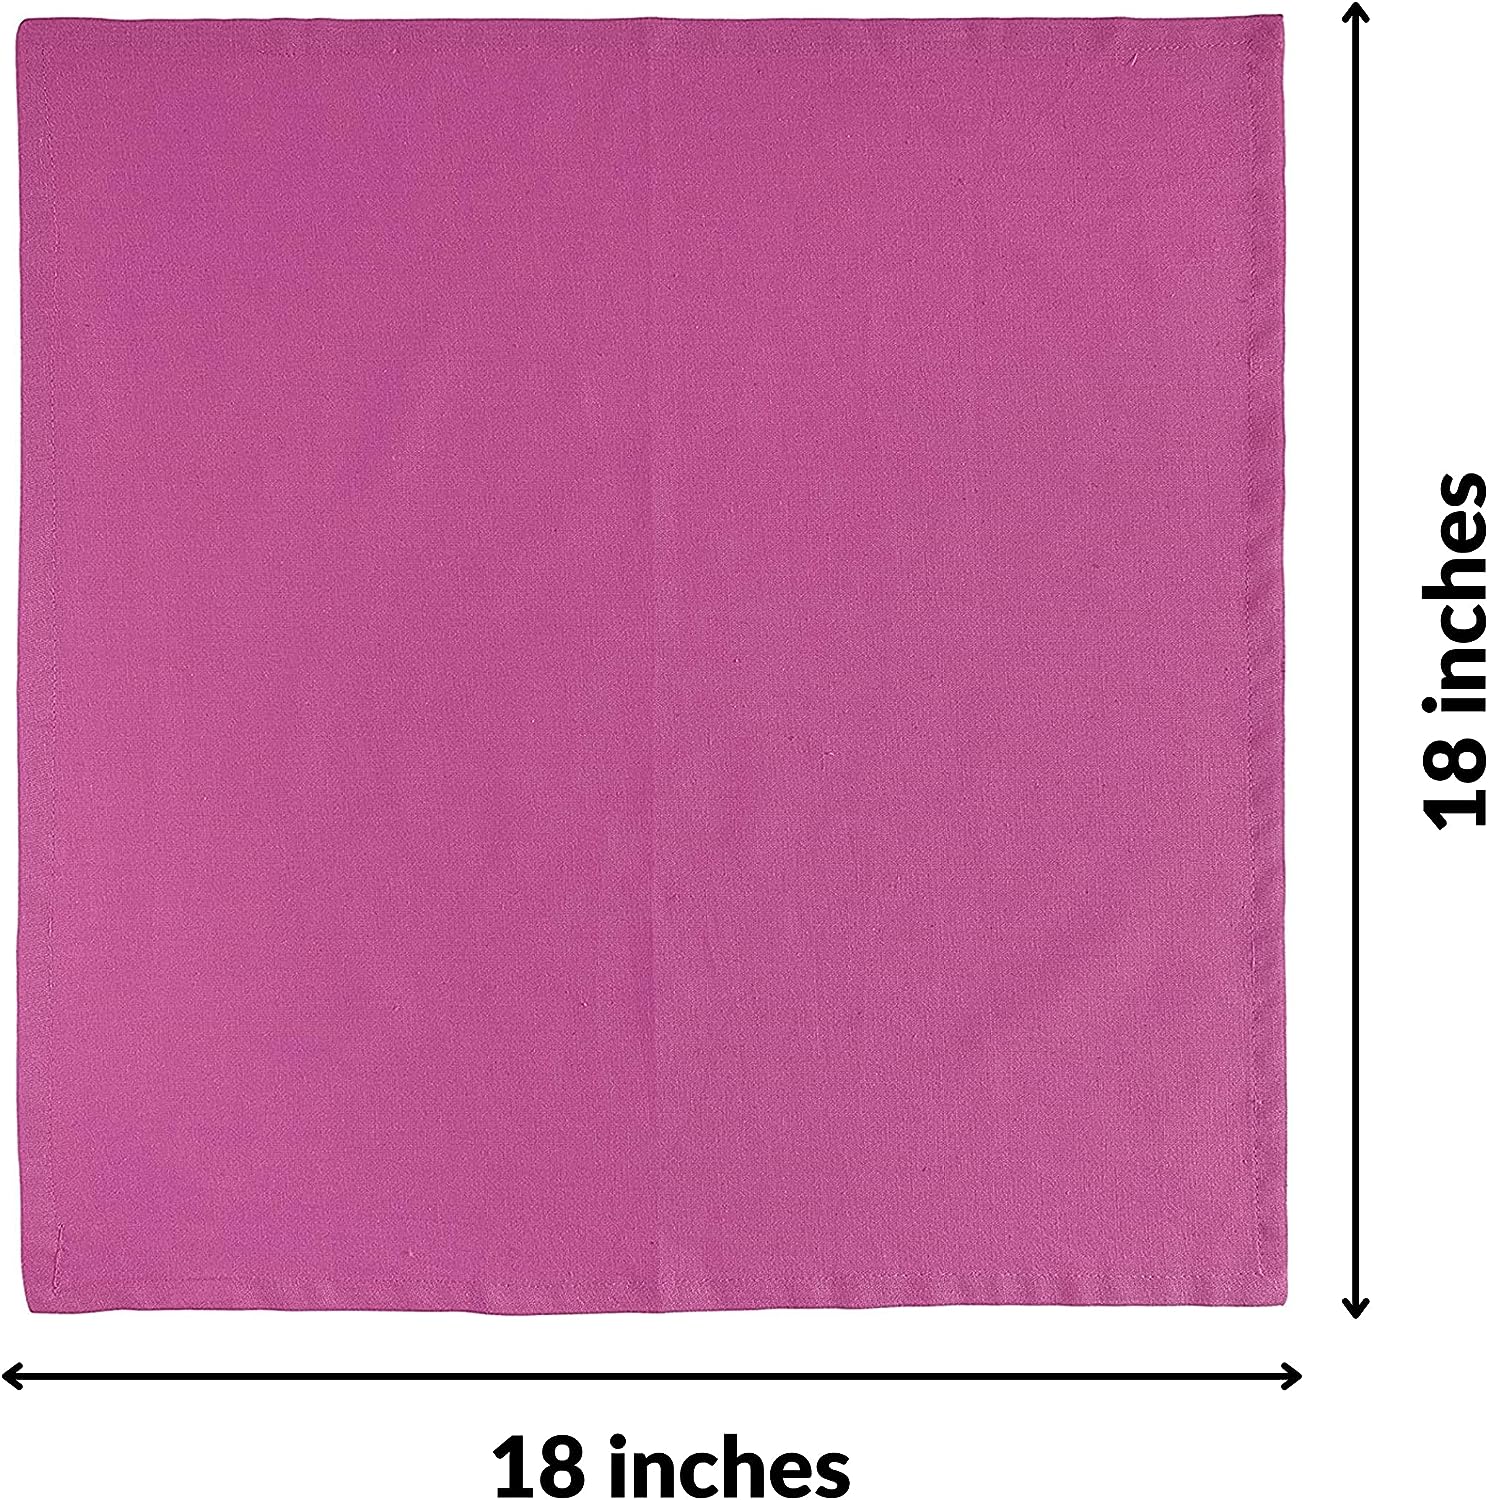 FINGERCRAFT Dinner Cloth Napkins, Cotton Linen Blend Fabric 12 Pack Easter Special, Premium Quality, Mitered Corners for Every Day Use Napkins are Pre Shrunk and Good Absorbency Magenta 5